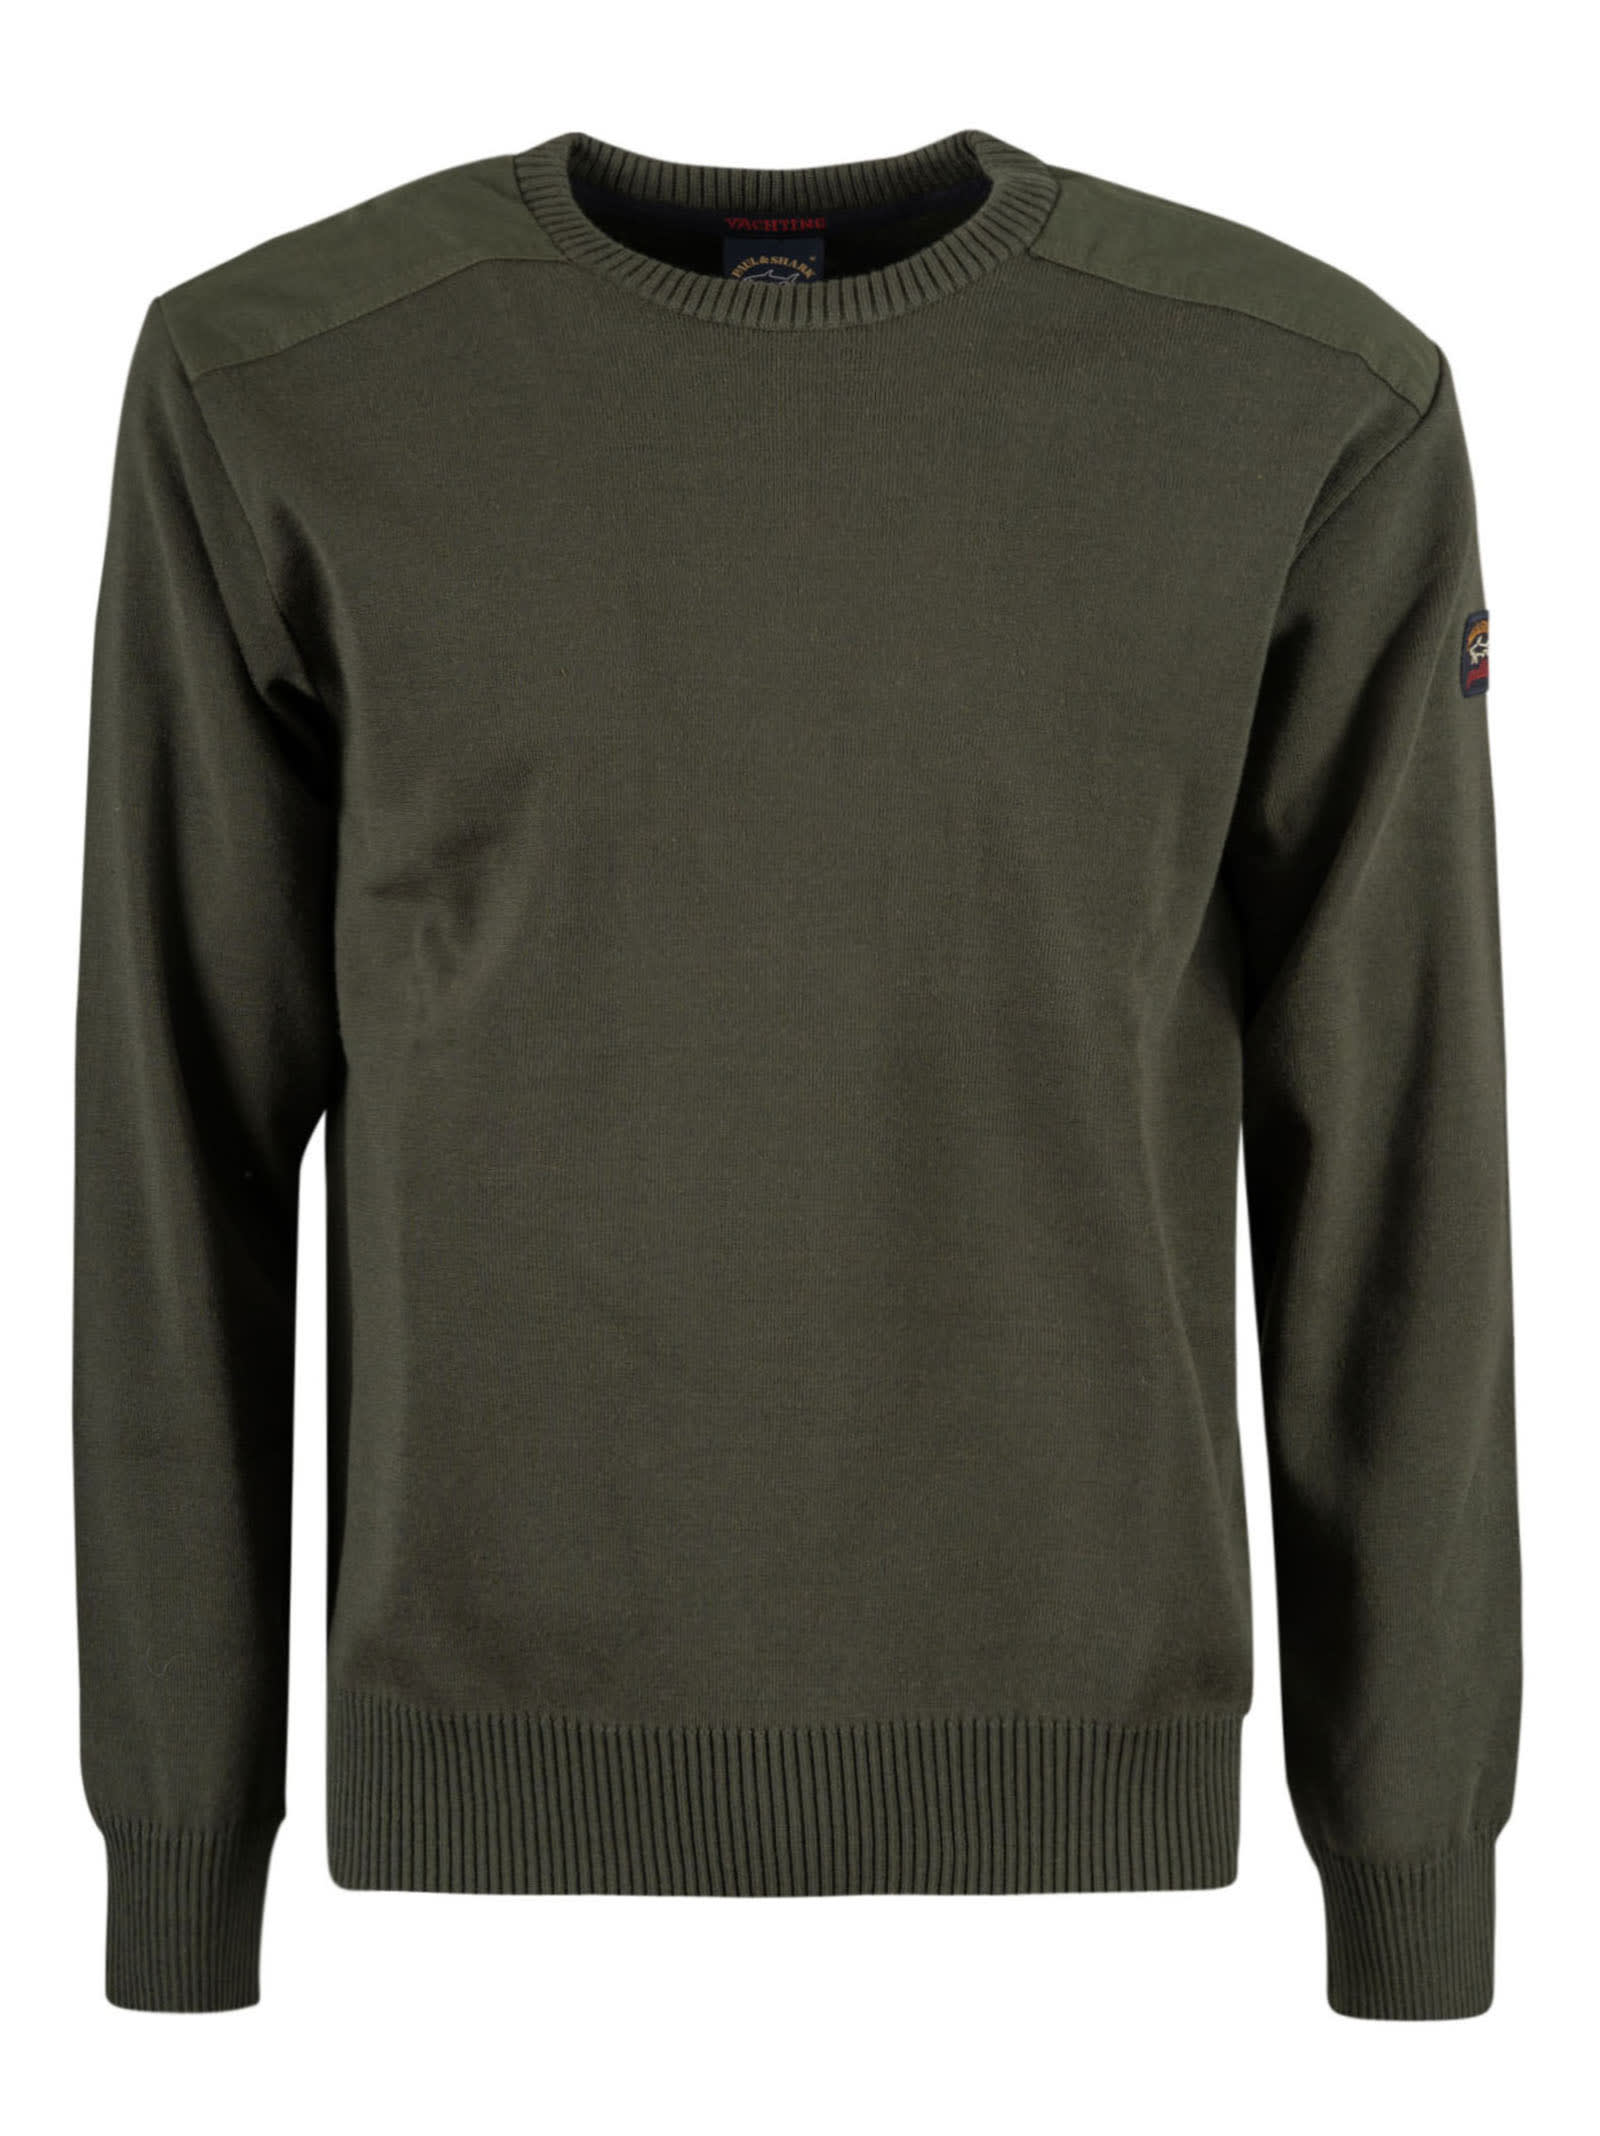 Paul&amp;shark Crewneck Logo Patched Jumper In Green